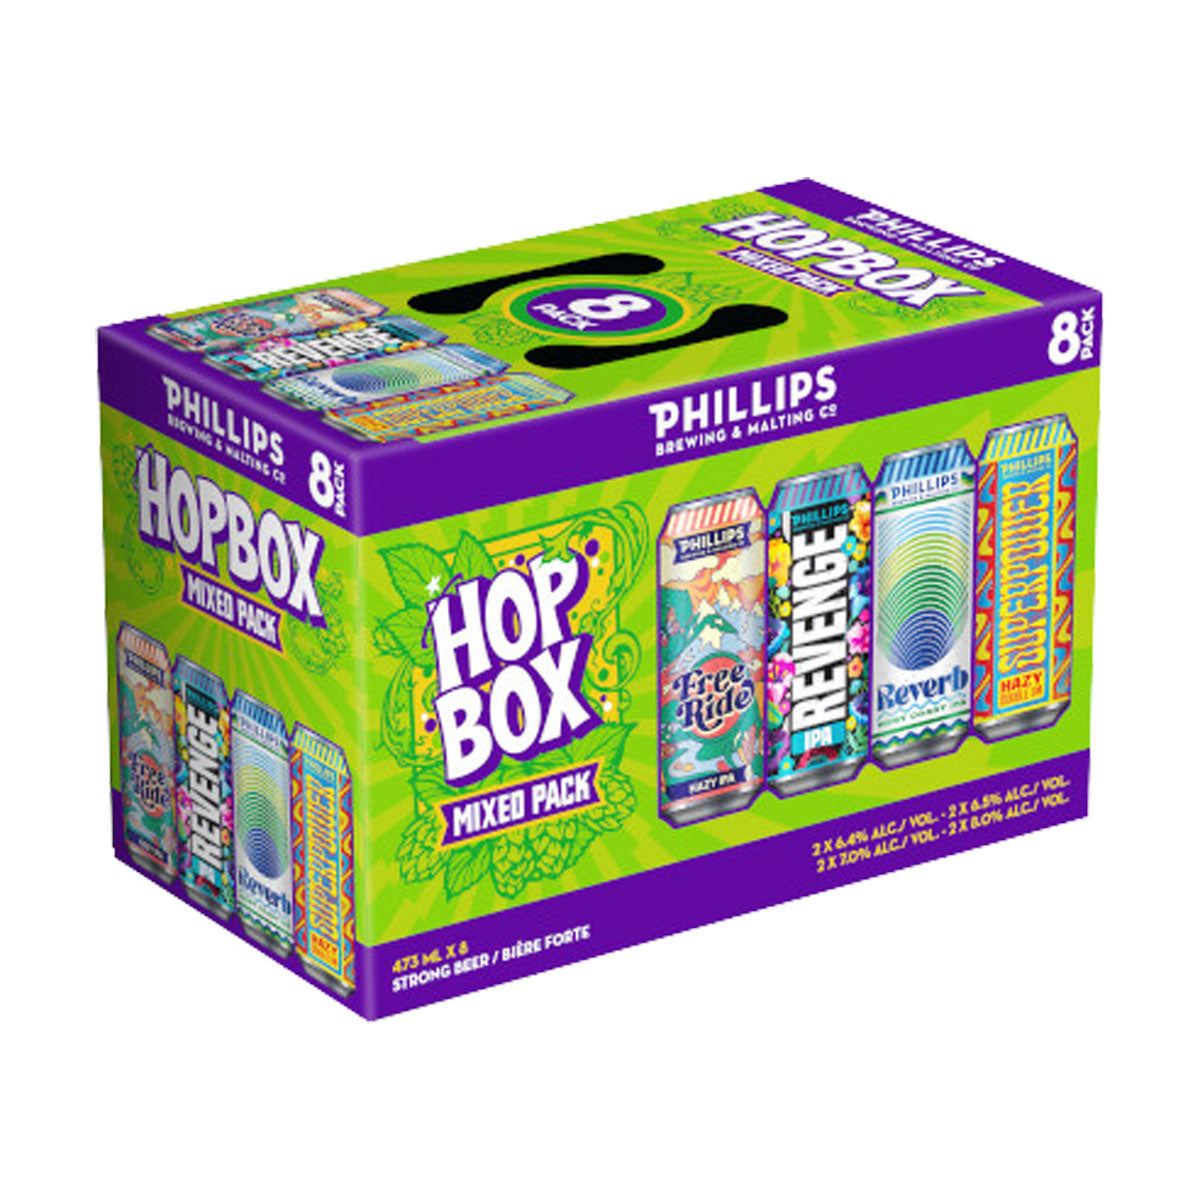 TAG Liquor Stores BC - Phillips Brewing Hop Box Mixed Pack 8 Cans